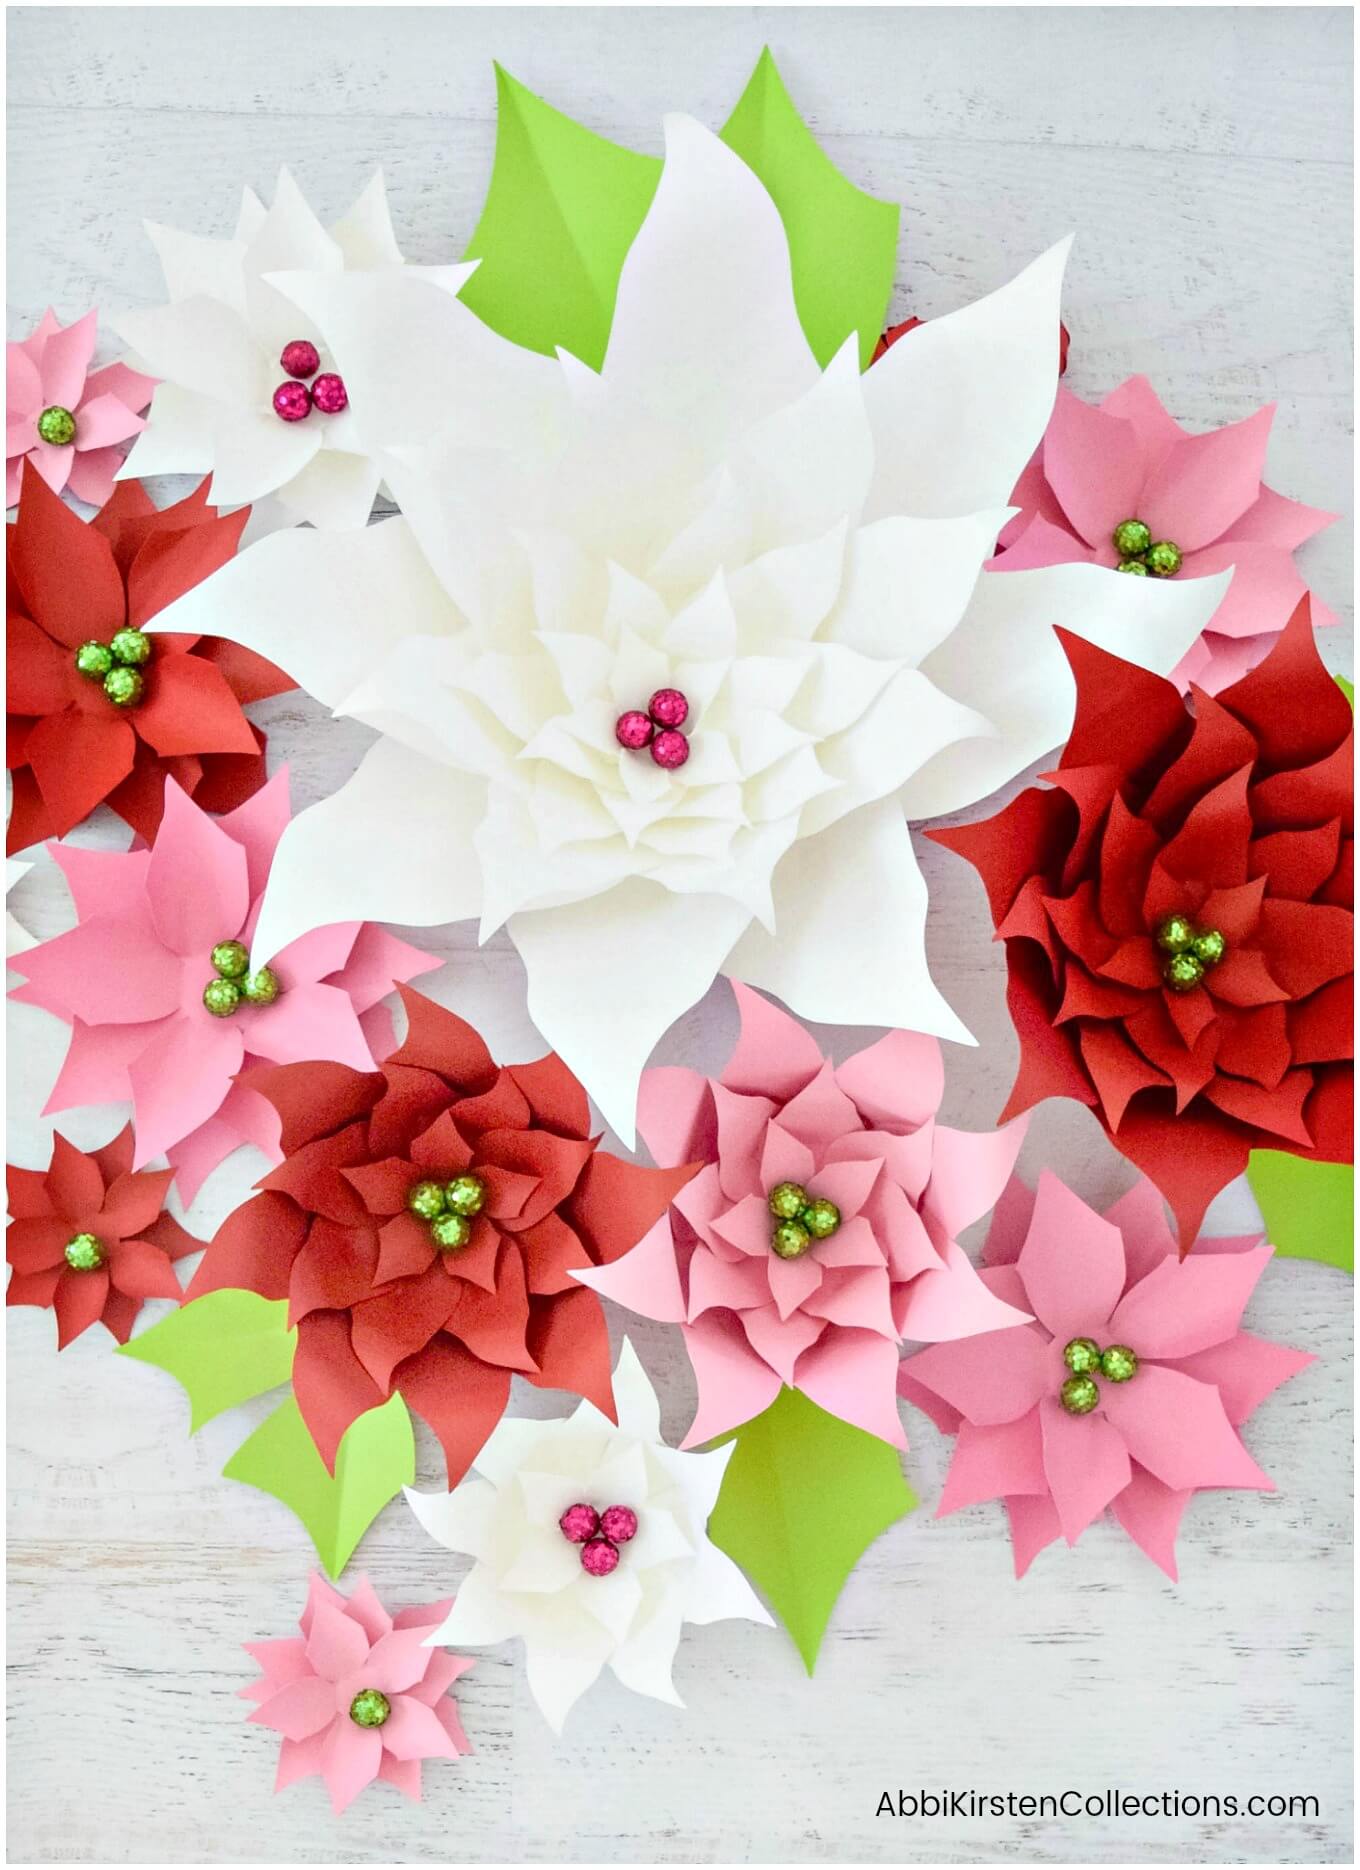 How to Make Christmas Paper Poinsettia Flowers